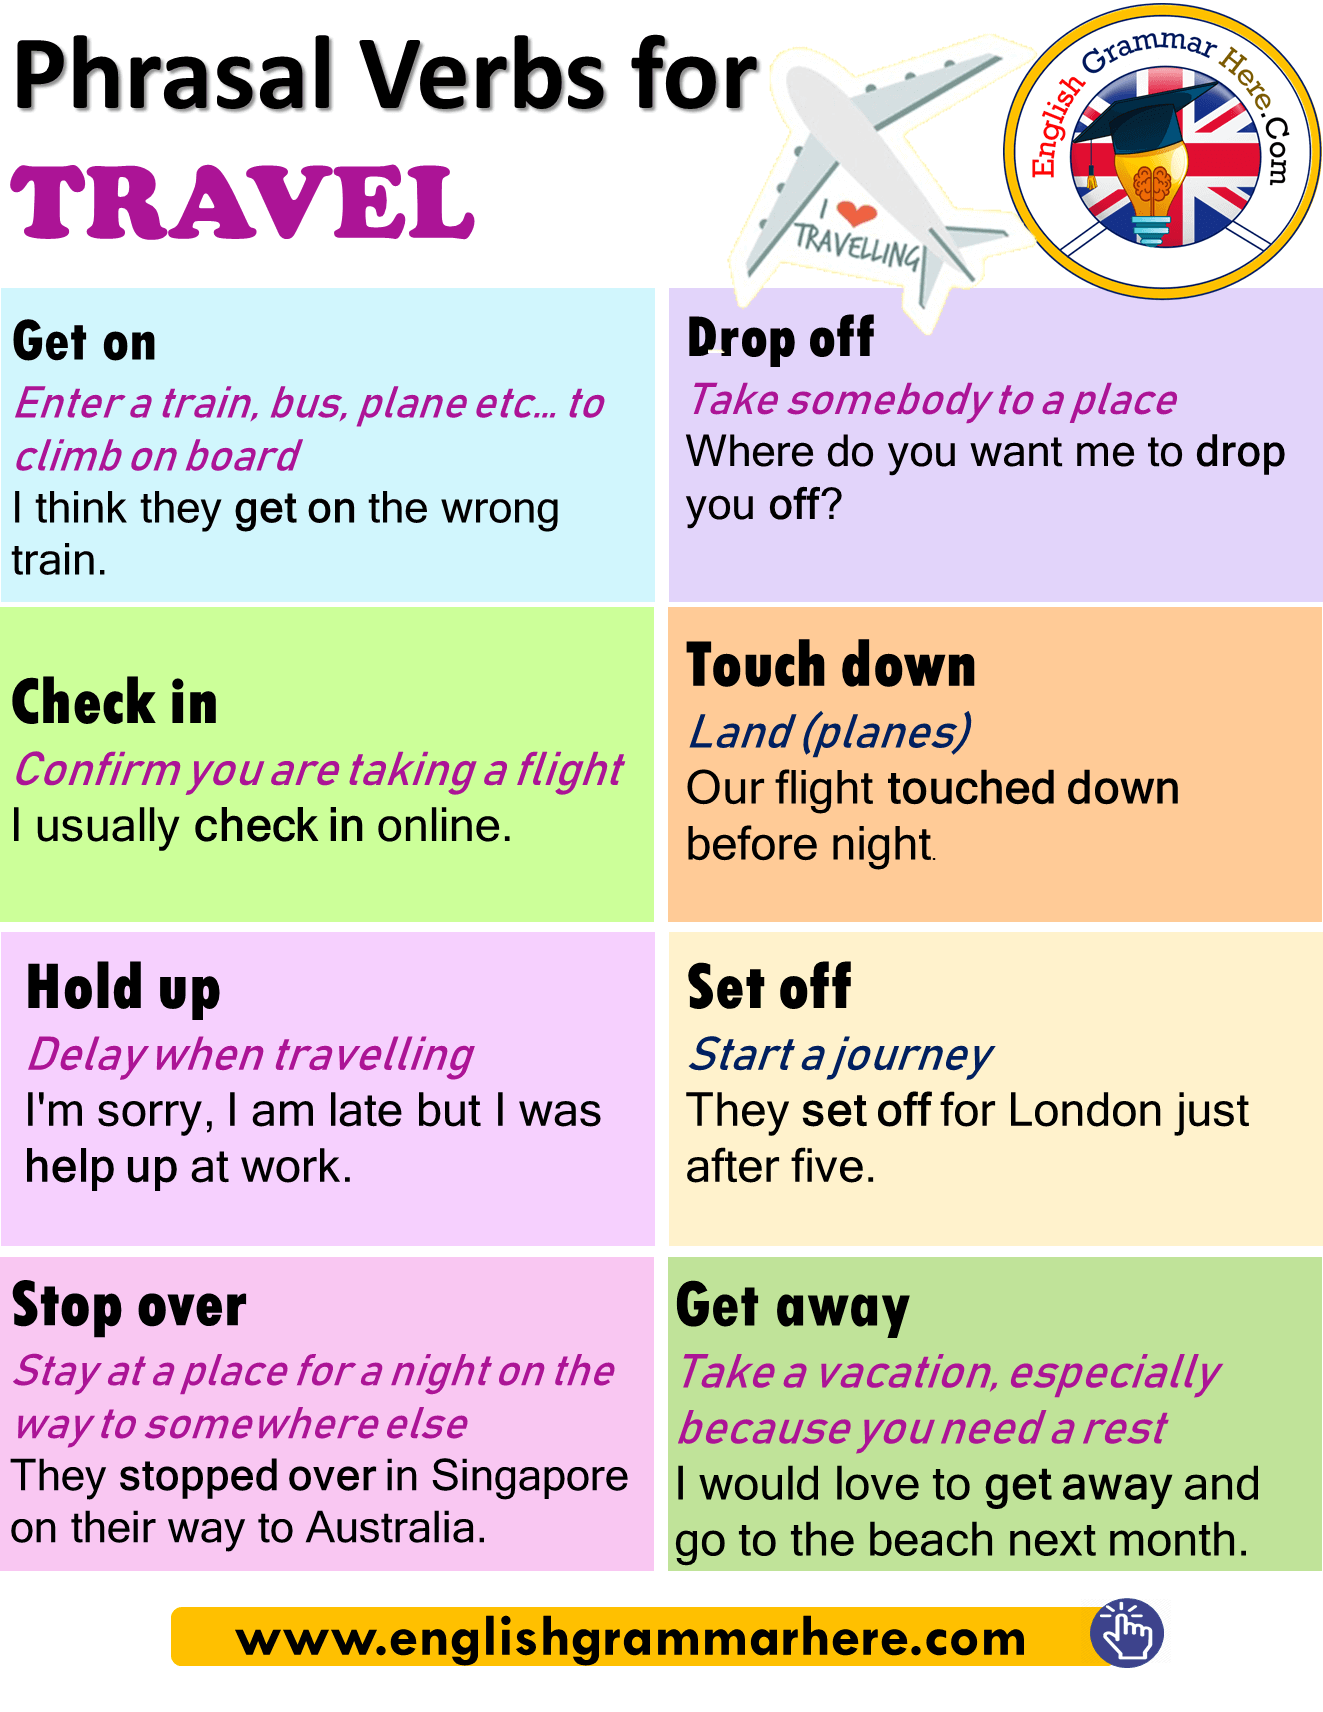 Phrasal Verbs for TRAVEL, Definitions and Example Sentences